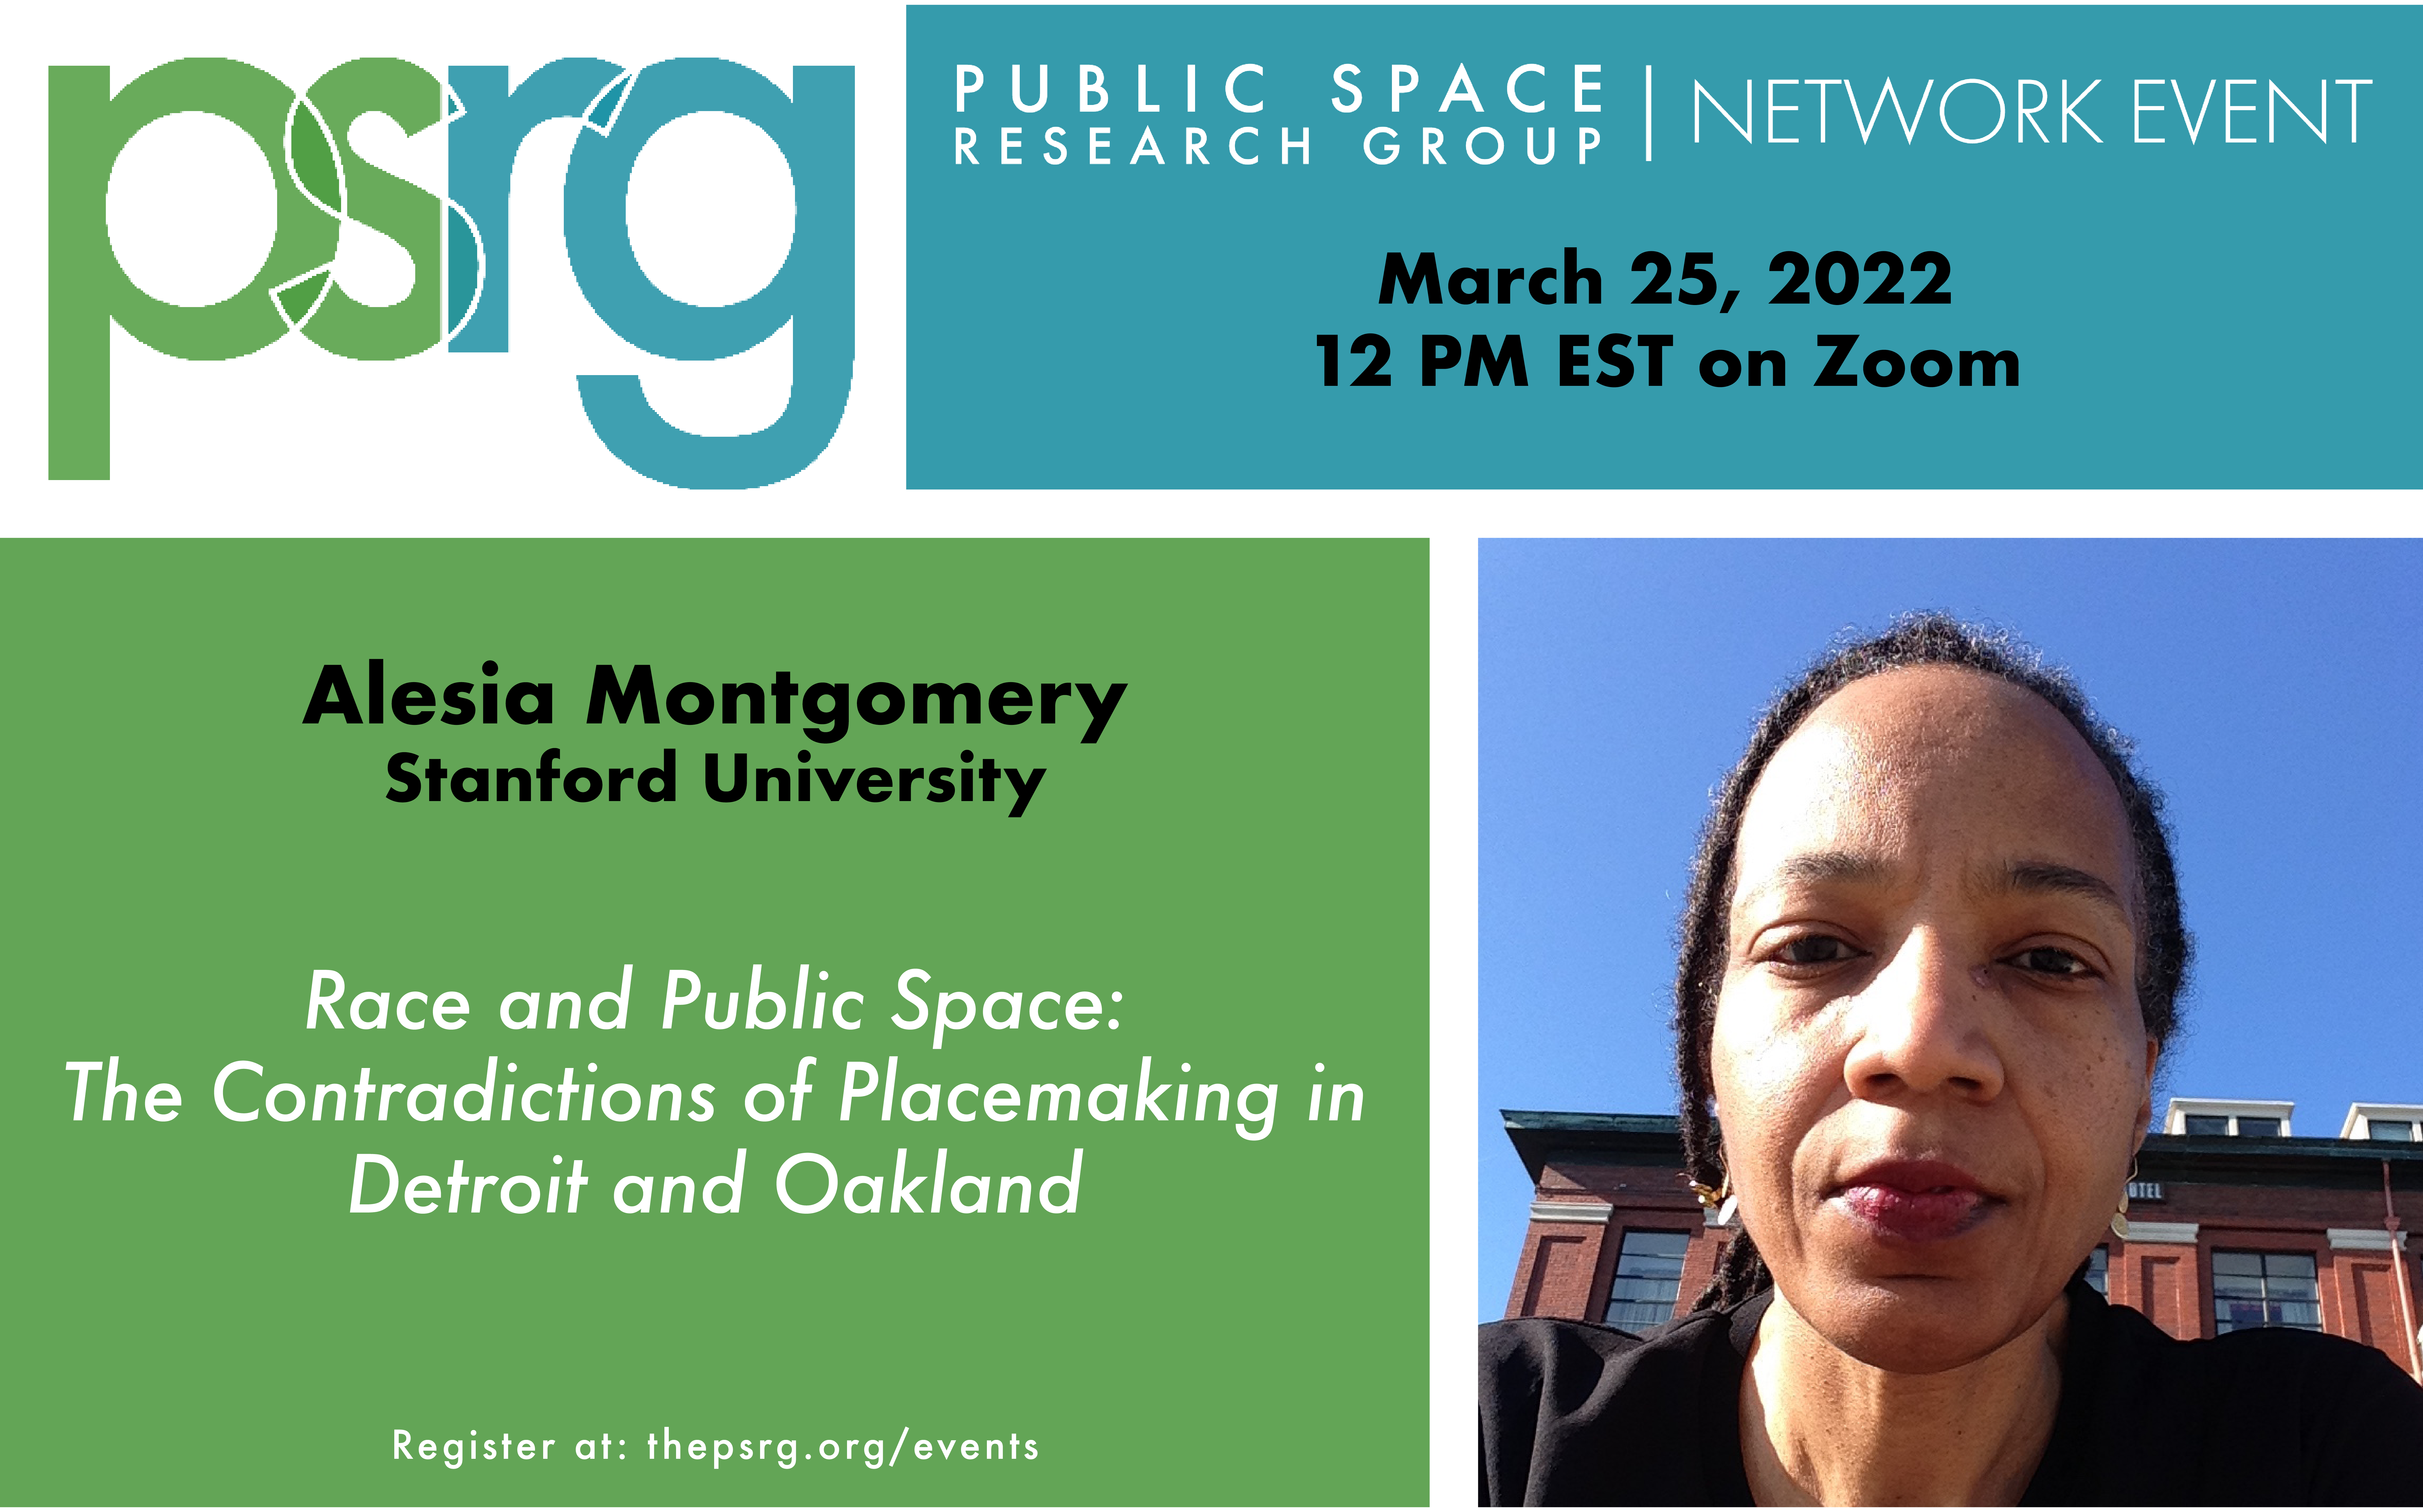 MARCH 25 @12 ET :: Alesia Montgomery presents: Race and public space: The contradictions of placemaking in Detroit and Oakland